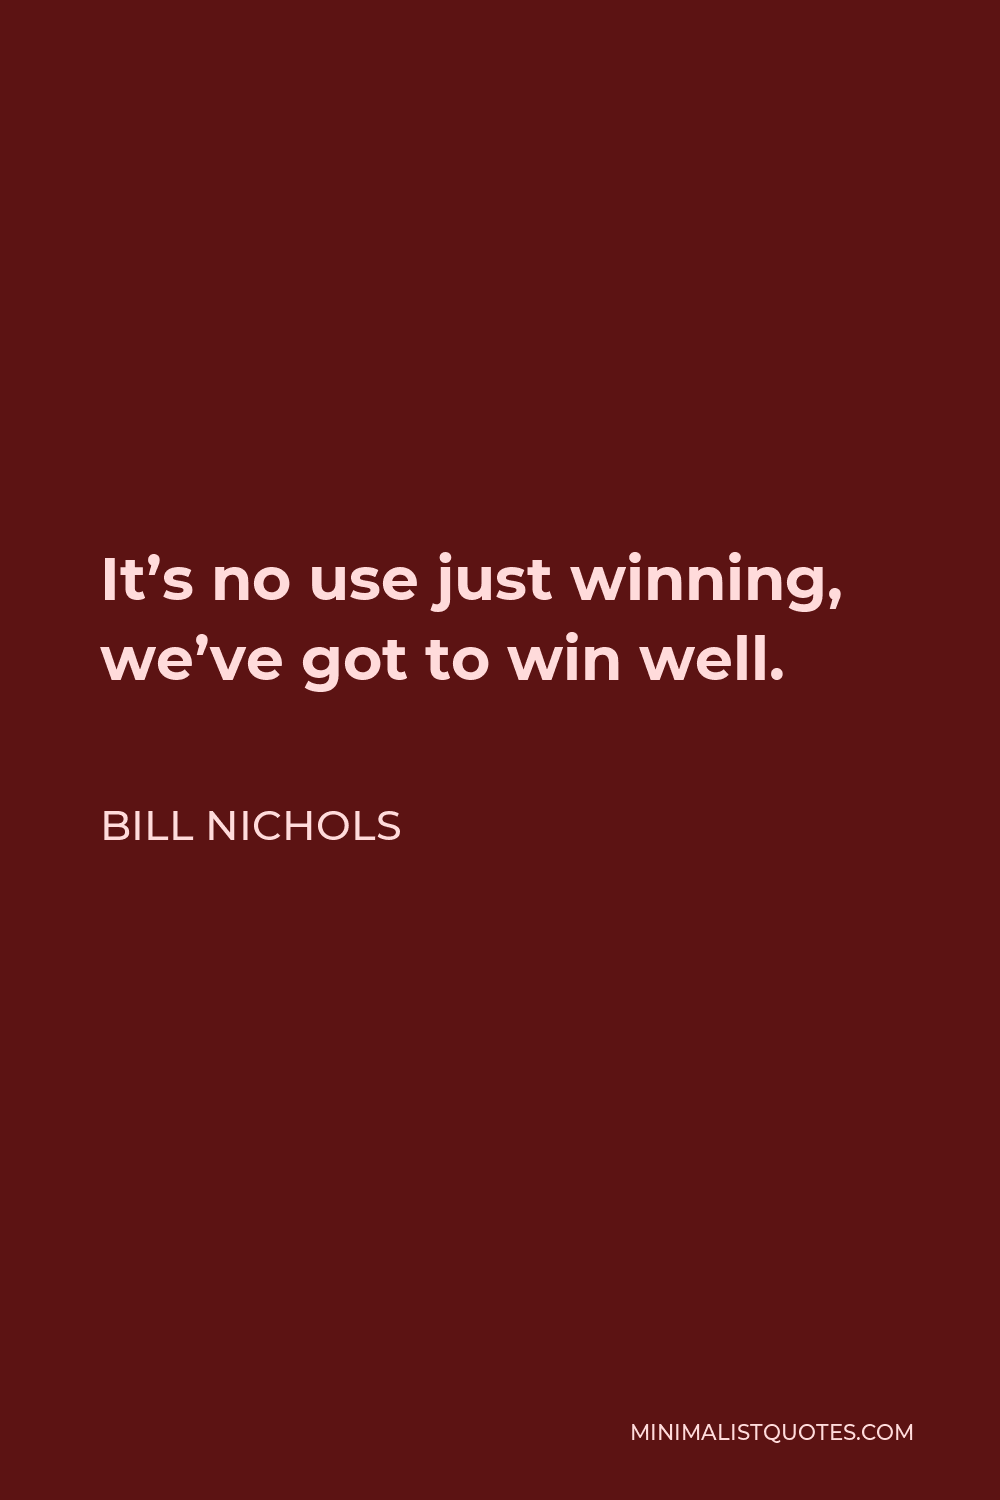 Bill Nichols Quote - It’s no use just winning, we’ve got to win well.